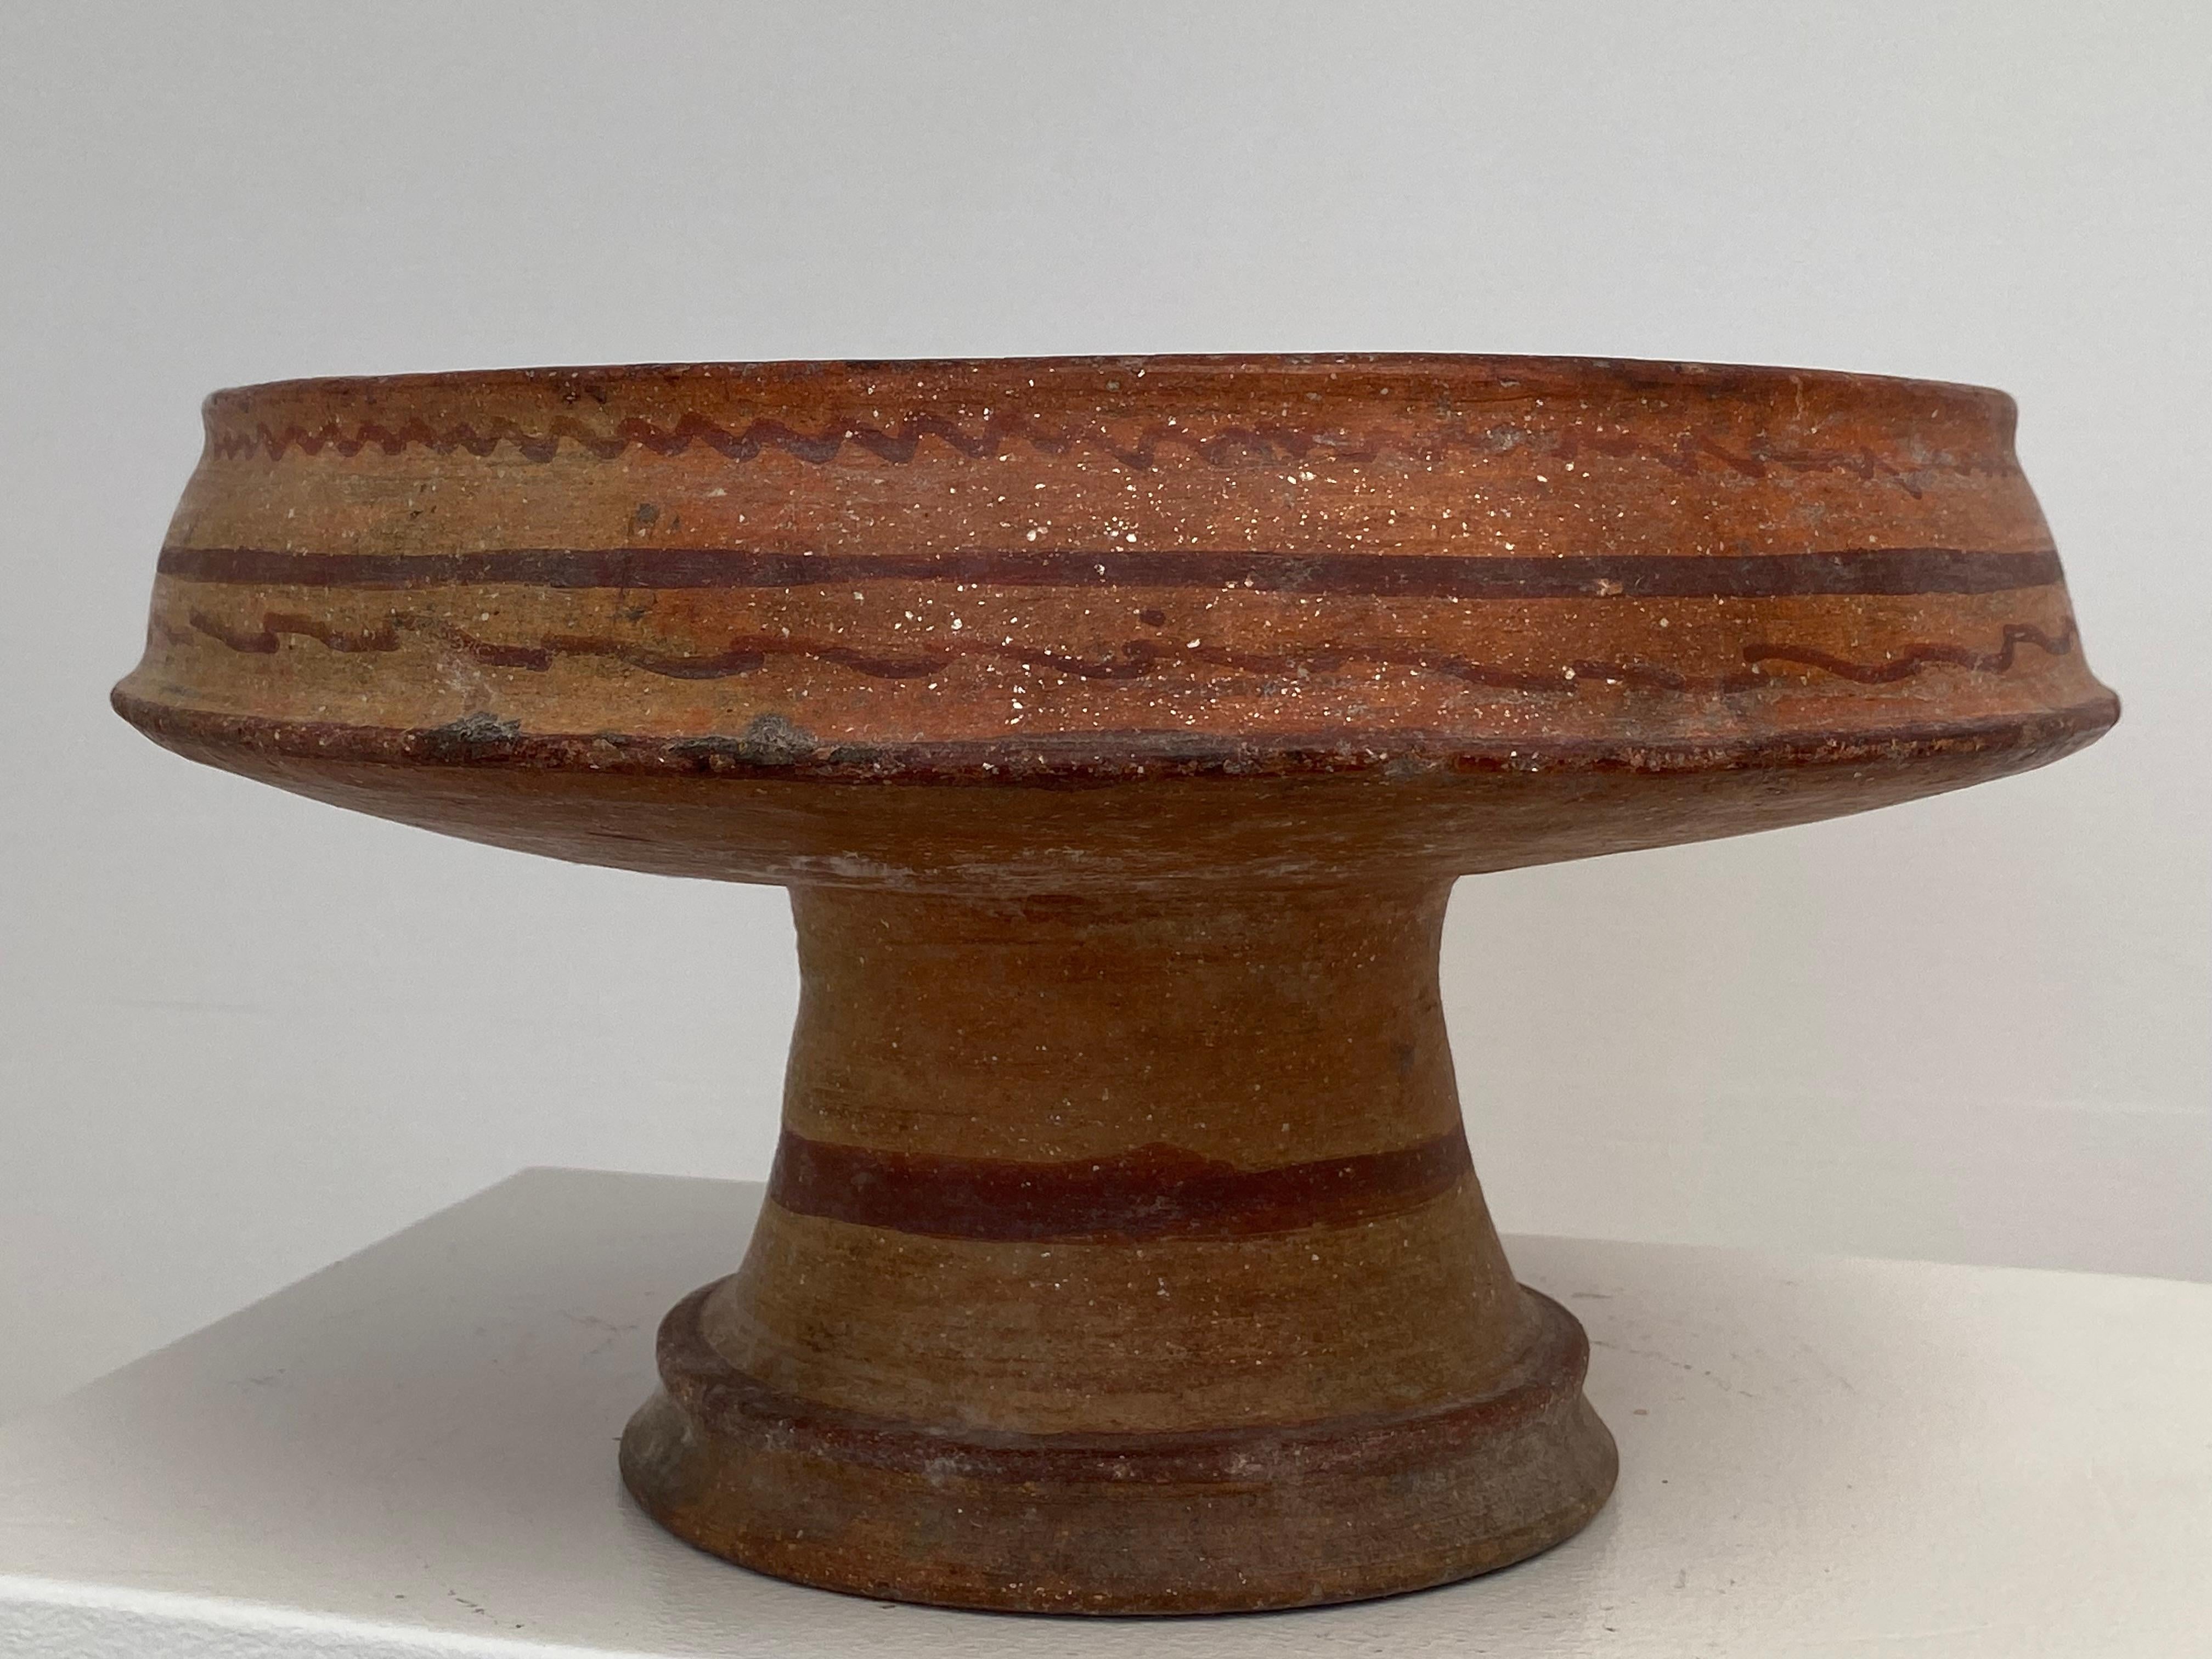 Very Elegant and antique Berber Terracota tazza on stand,
old and beautiful patina and shine of the terracotta,
horizontal Brown and Red lines used as decoration,
very decorative object that can be used for different purposes